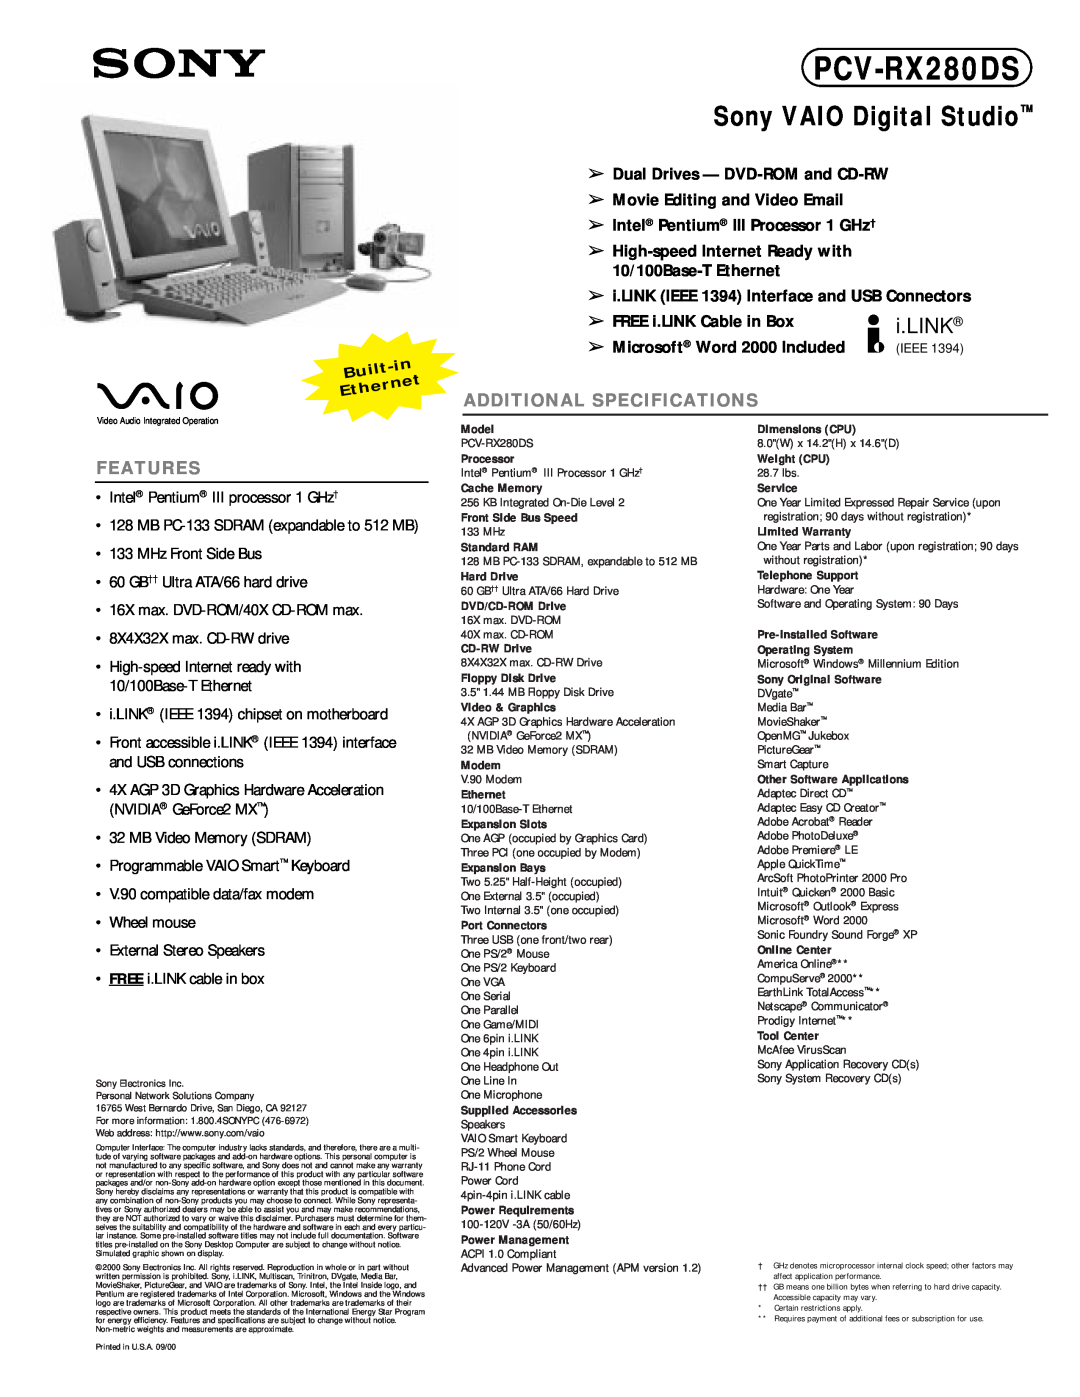 Sony PCV-RX280DS dimensions Sony VAIO Digital Studio, i.LINK, Additional Specifications, Features, in Built Ethernet 